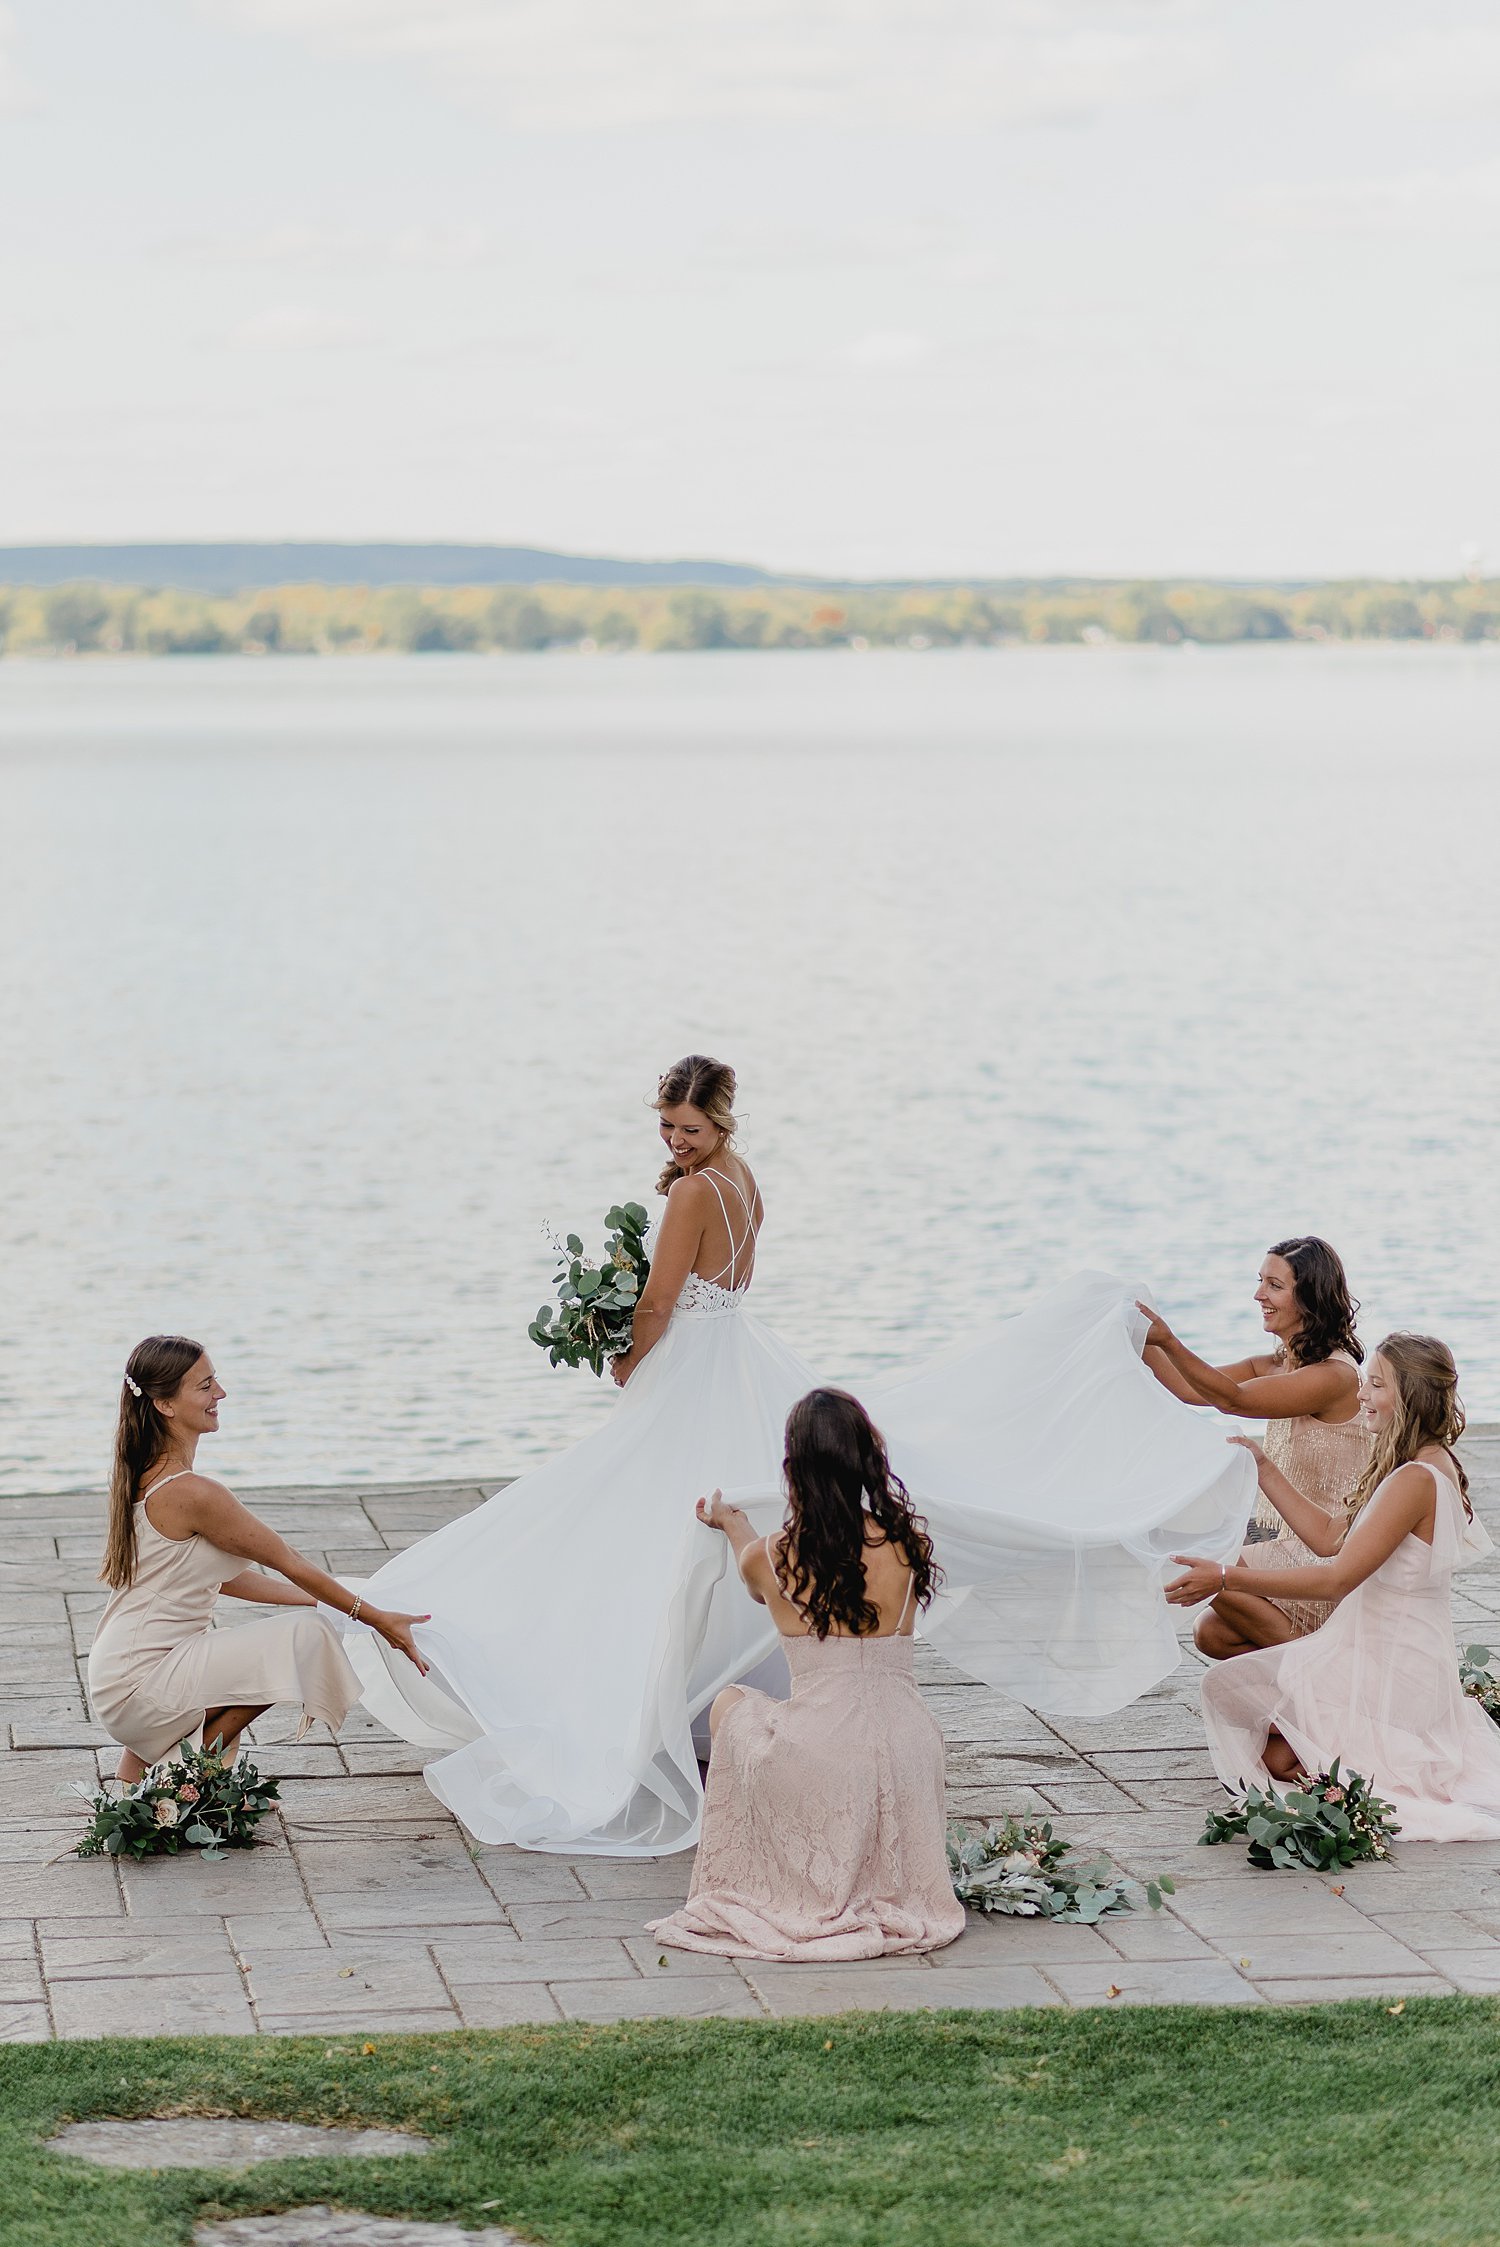 A Royal Canadian Mountie's Intimate Summer Wedding in Prince Edward County | Prince Edward County Wedding Photographer | Holly McMurter Photographs_0017.jpg